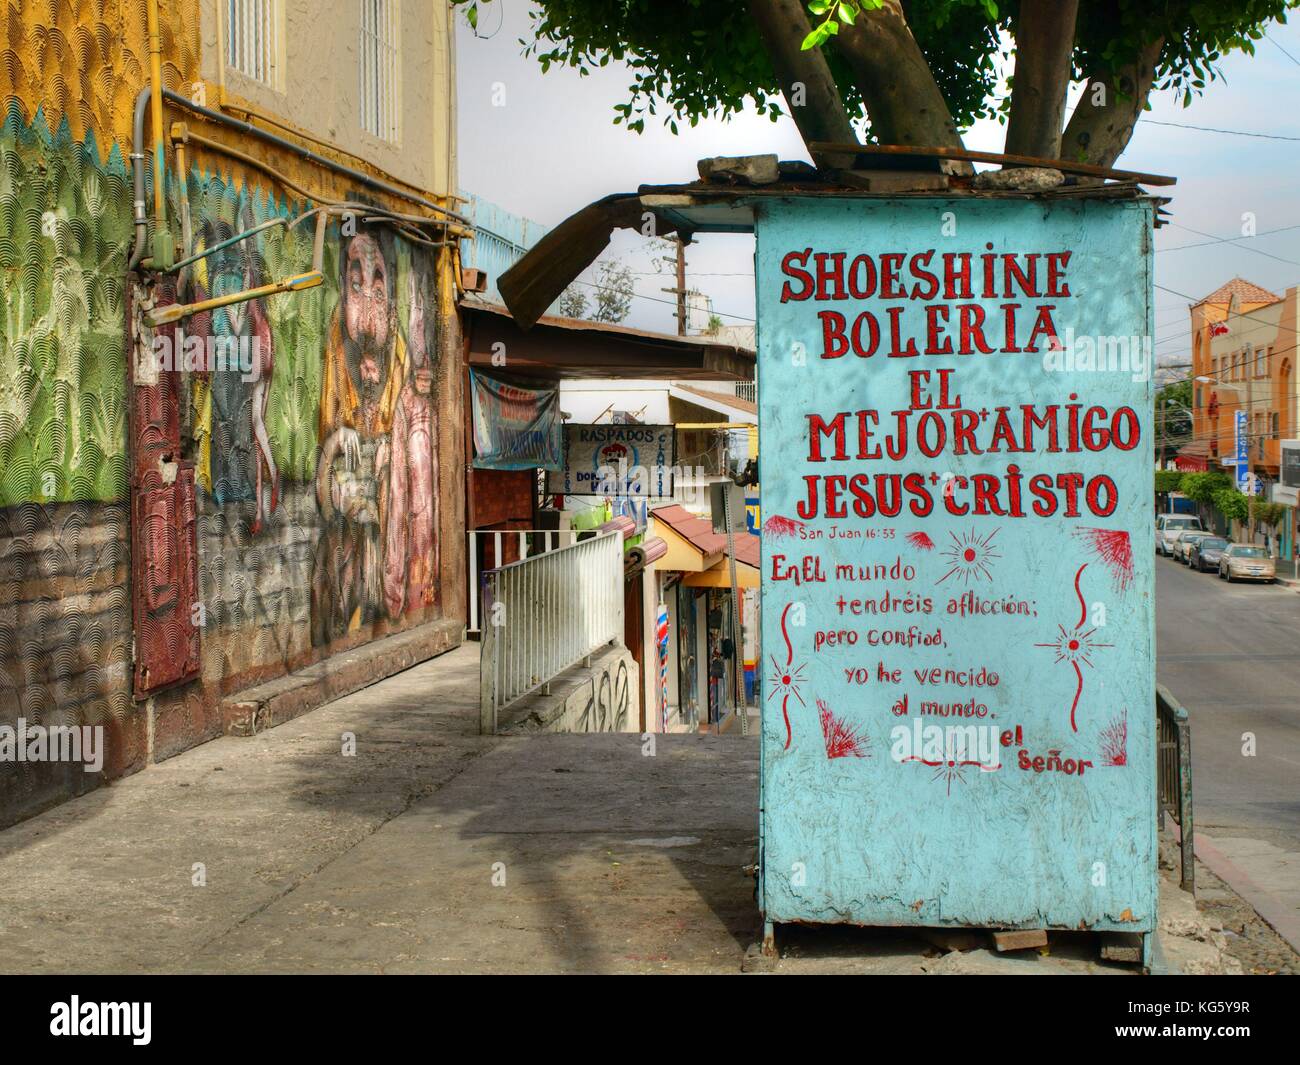 Tijuana, Mexico - September 1, 2015: Small blue shoeshine booth with religious inscription on side in Spanish Stock Photo